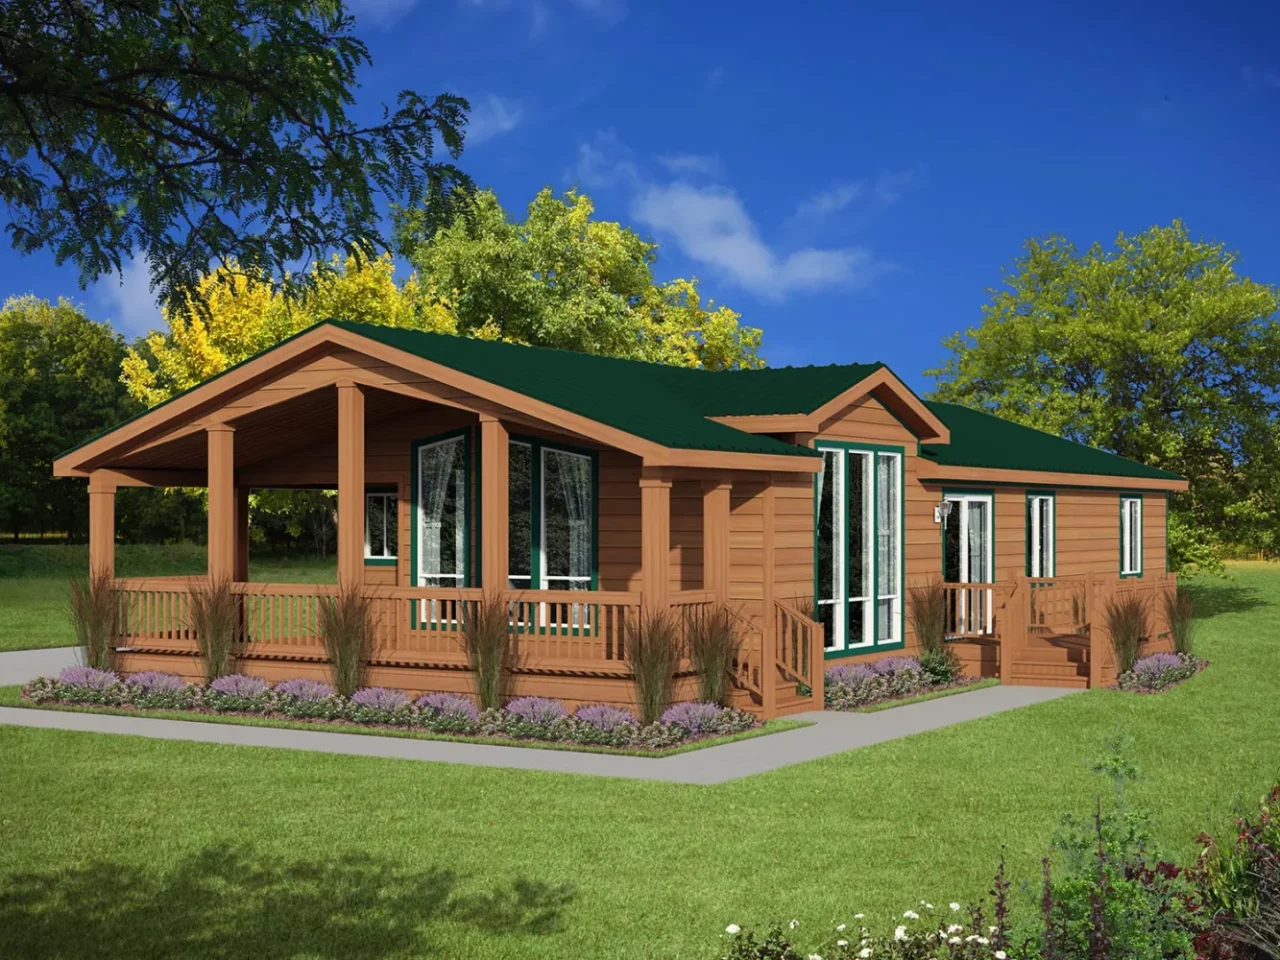 Exterior view of the Skyline Homes Westridge 1218CT Manufactured Home